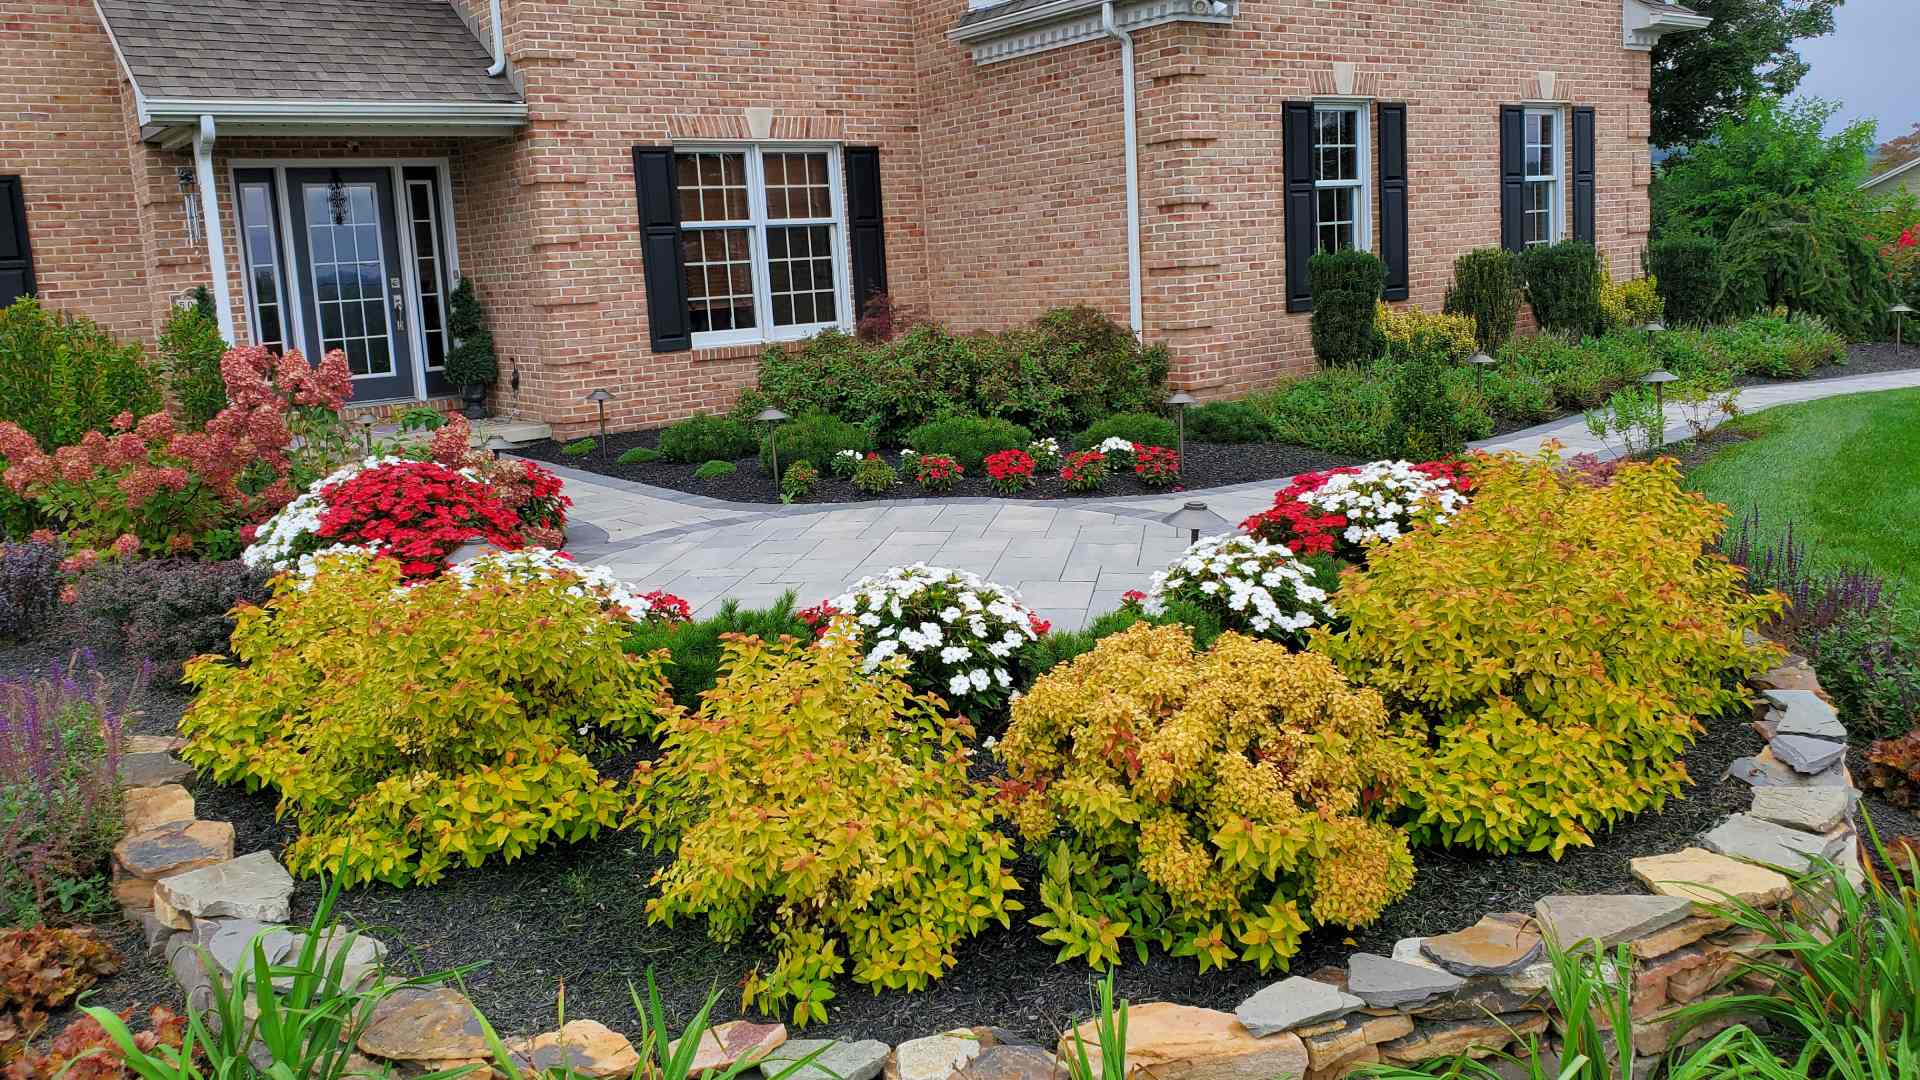 Landscaping maintained by Lehigh Valley in Macungie, PA.